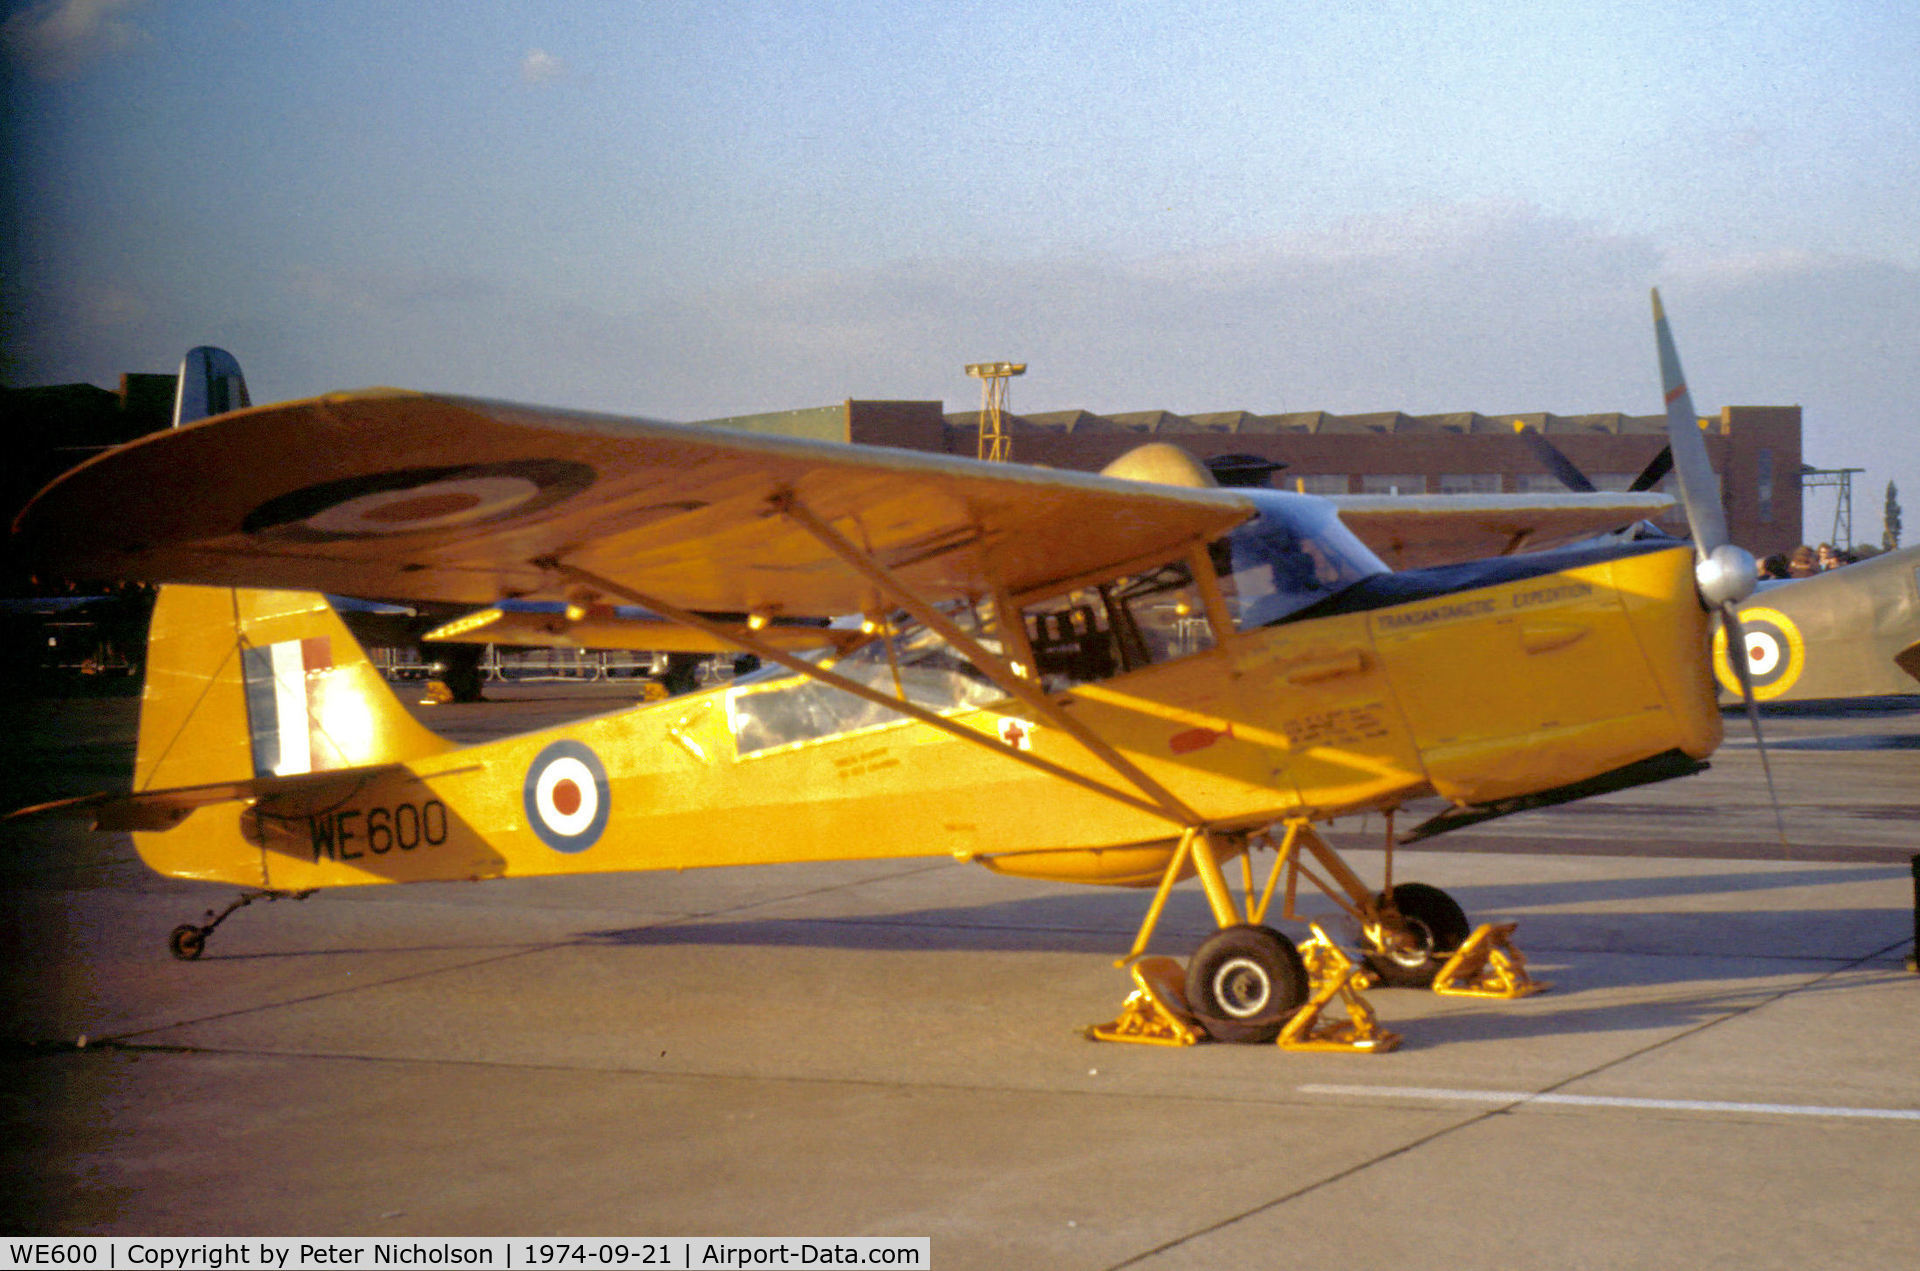 WE600, Auster C-4 Auster T7 Antarctic C/N Not found WE600, Auster Antartic T.7 used in the 1956 Trans-Artic Expedition on display at the 1974 RAF Finningley Airshow.